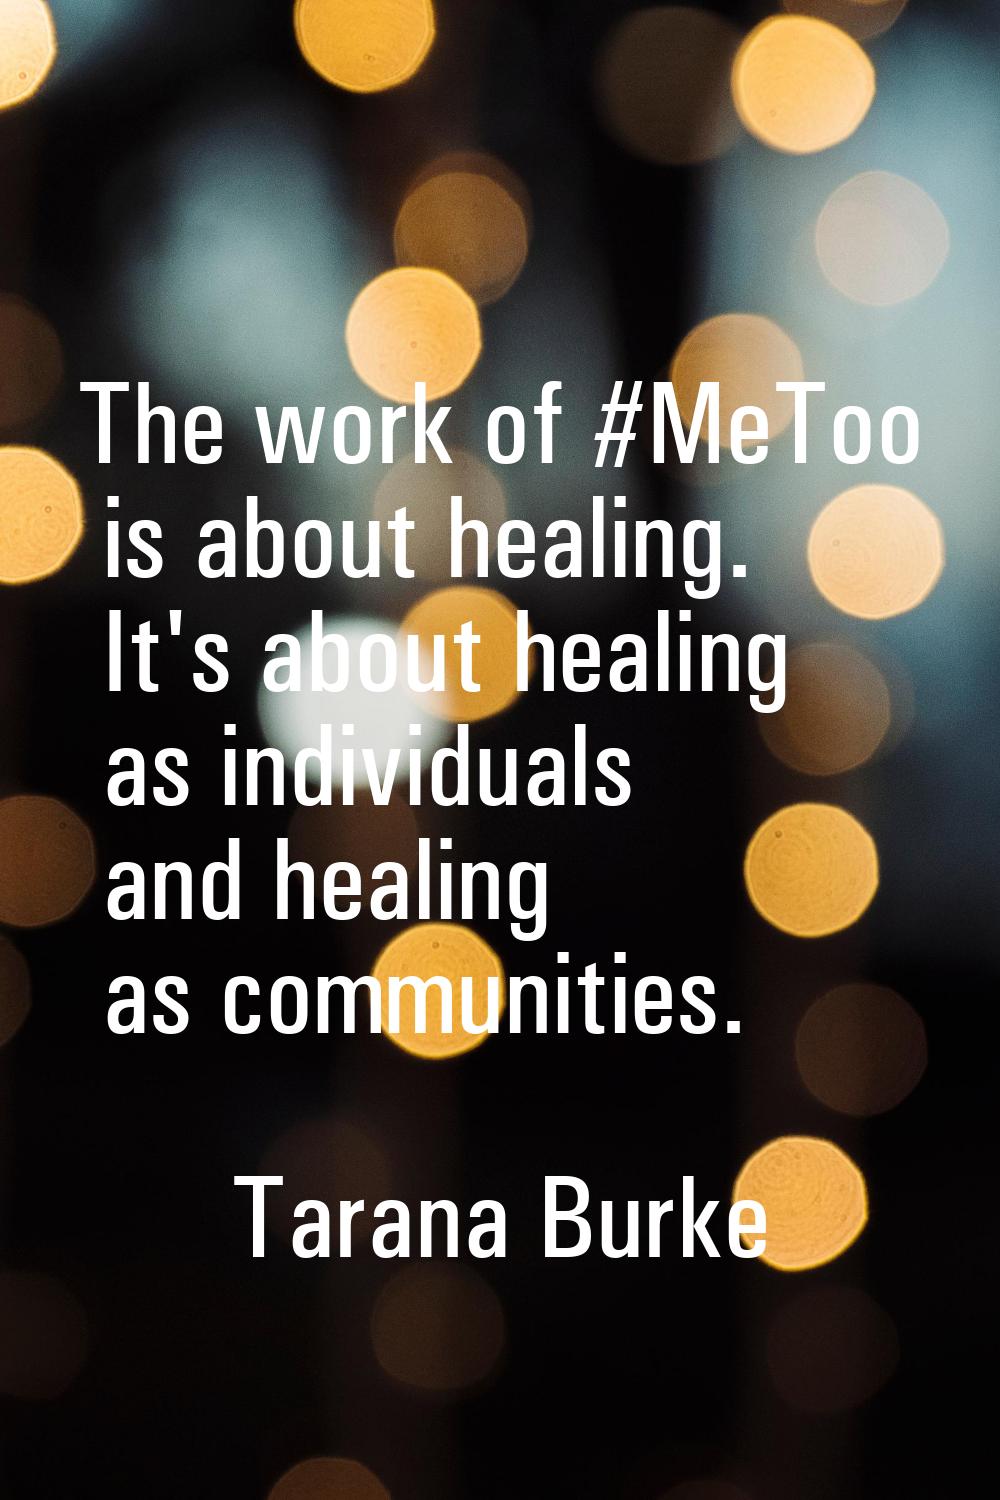 The work of #MeToo is about healing. It's about healing as individuals and healing as communities.